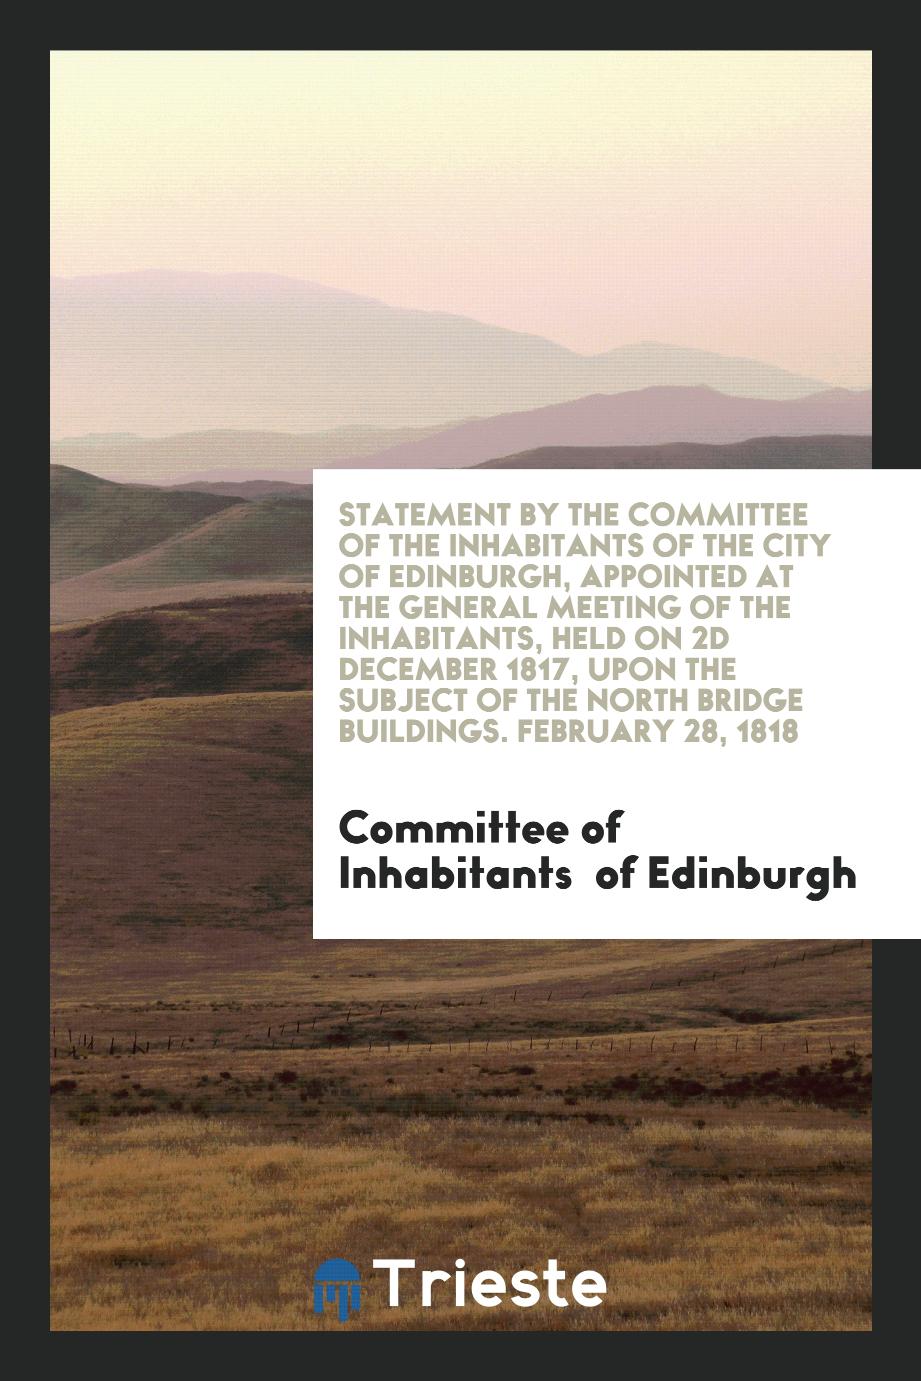 Statement by the Committee of the Inhabitants of the City of Edinburgh, appointed at the general meeting of the inhabitants, held on 2d December 1817, upon the subject of the North Bridge Buildings. February 28, 1818